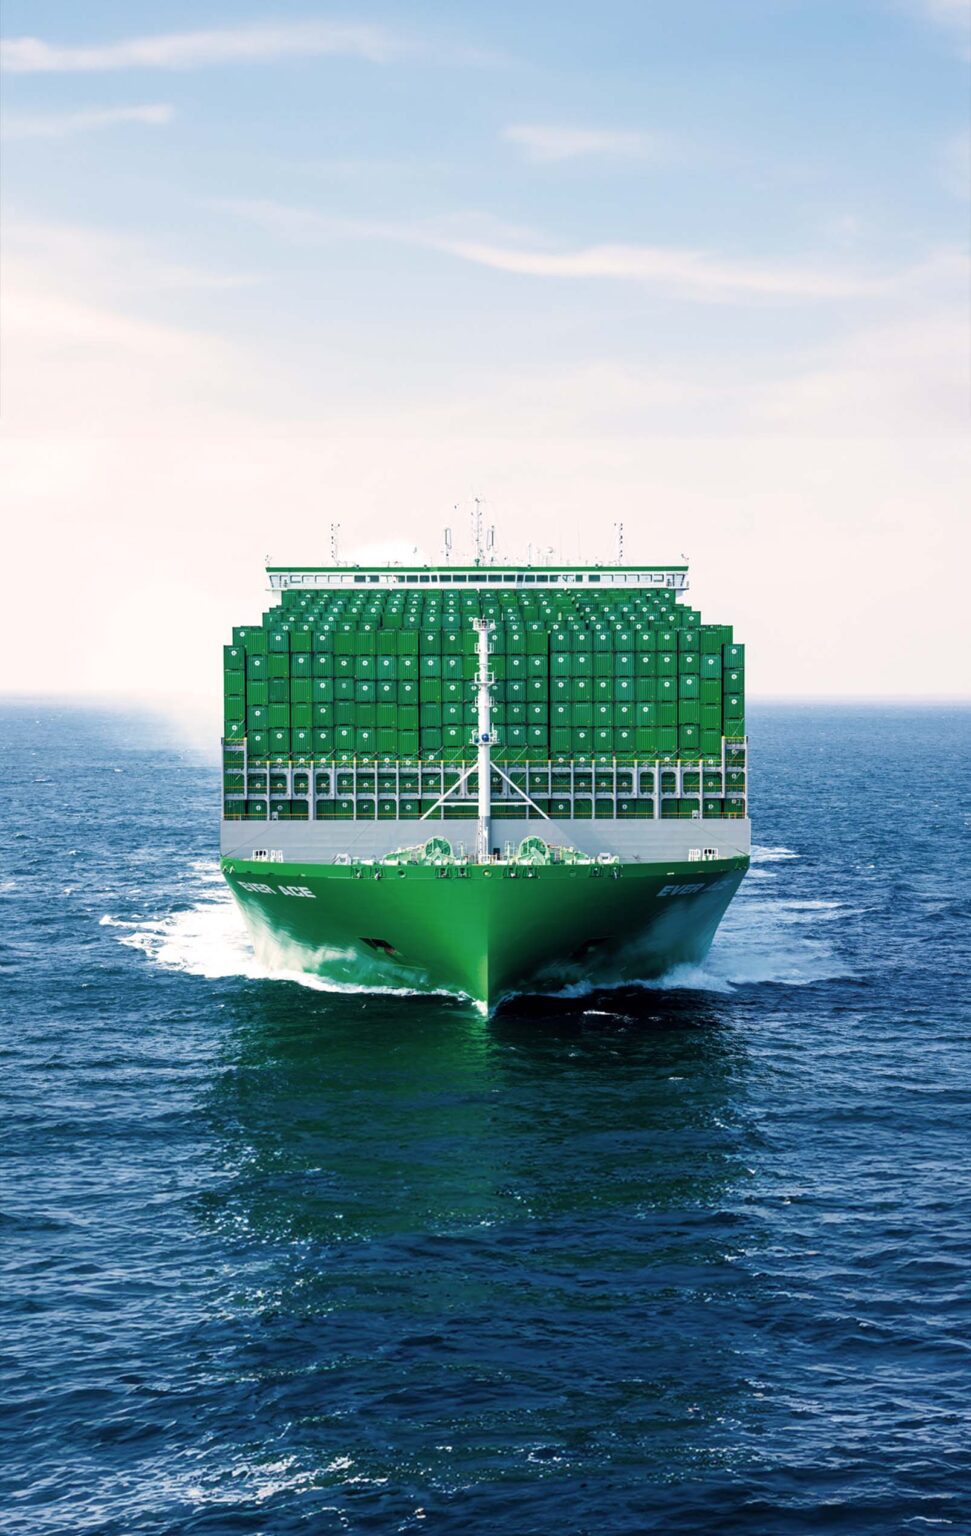 A large green Evegreen cargo ship filled with stacked containers is navigating through blue ocean waters. The sky is clear with a few scattered clouds. The ship's bow is cutting through the waves, creating white froth as it moves forward. The containers create a solid wall of green, indicating a full load. The scene conveys a sense of robust maritime commerce and the vastness of oceanic travel.